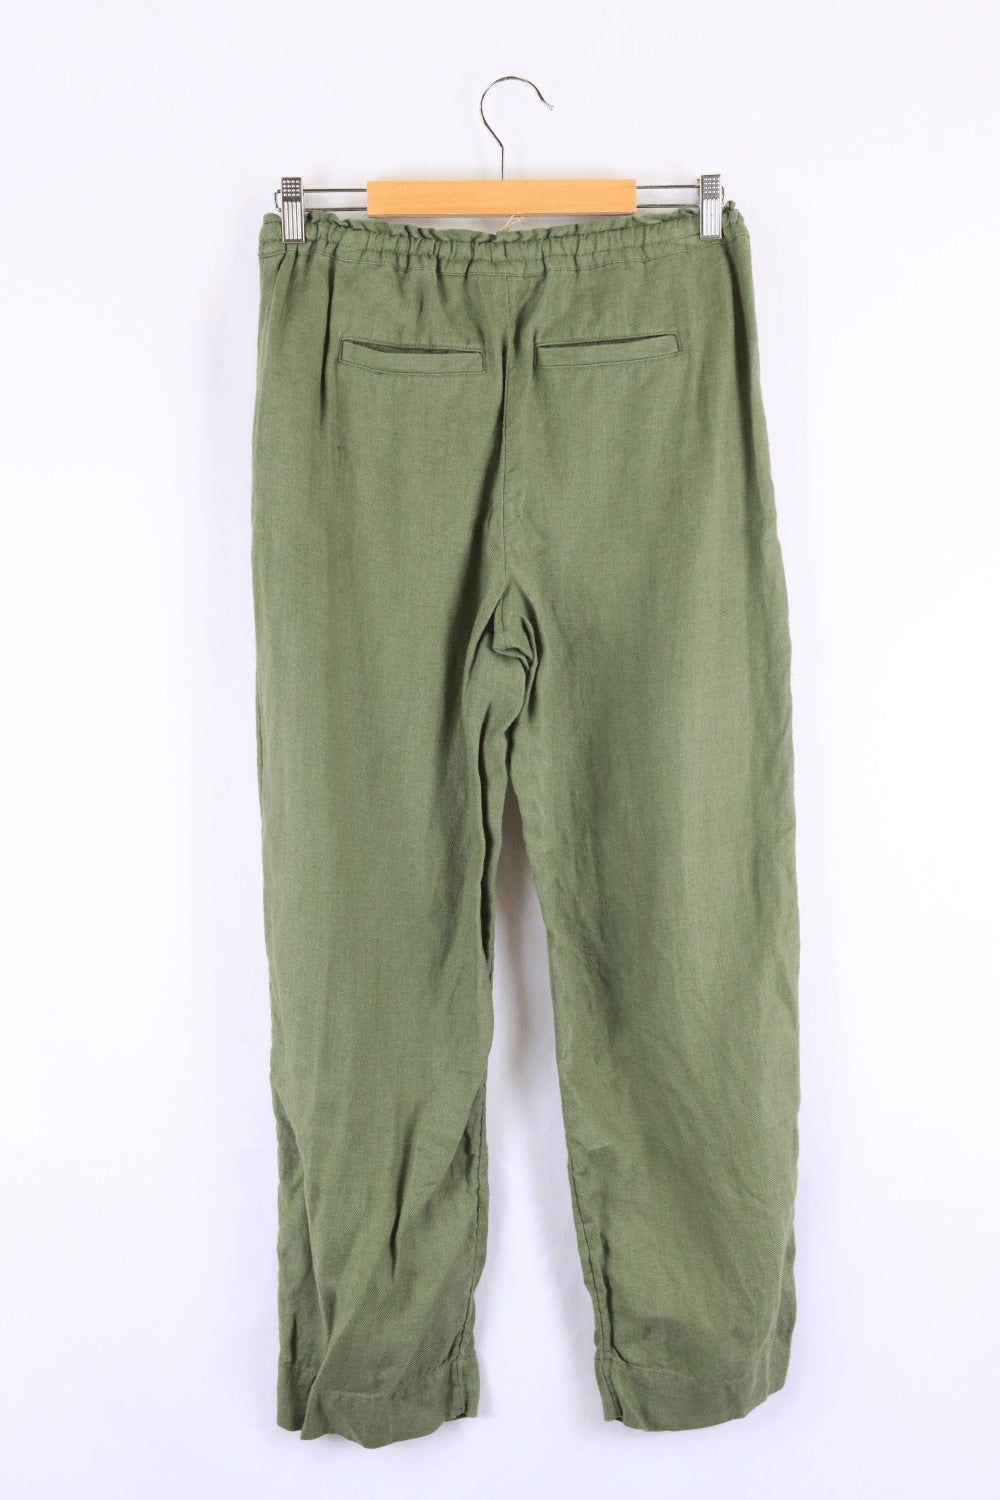 Country Road Green Pants 6